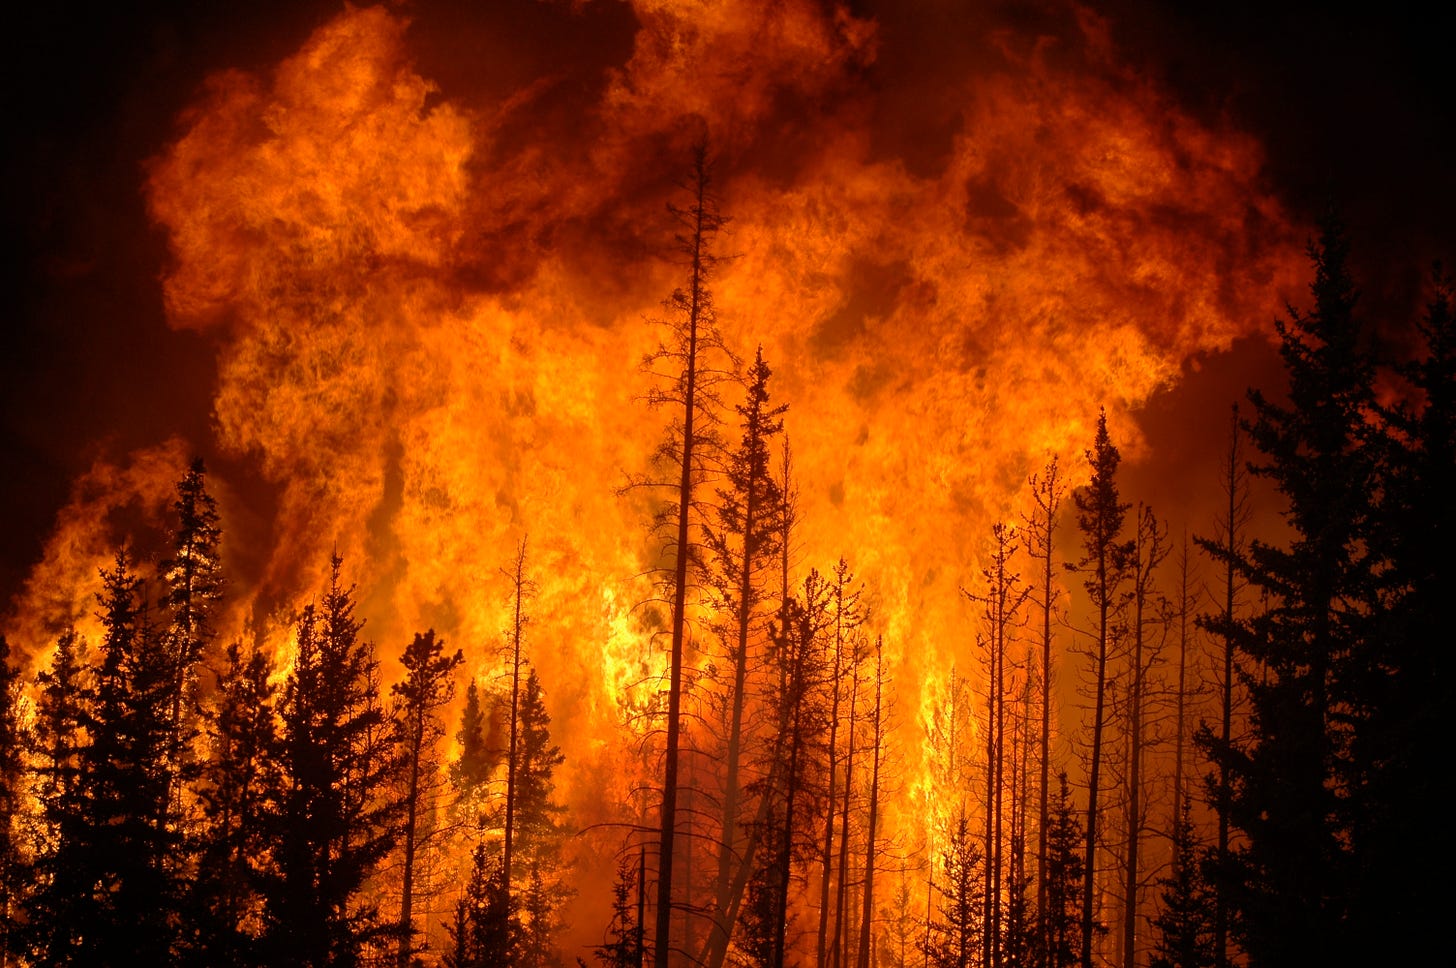 A forest fire rages at night